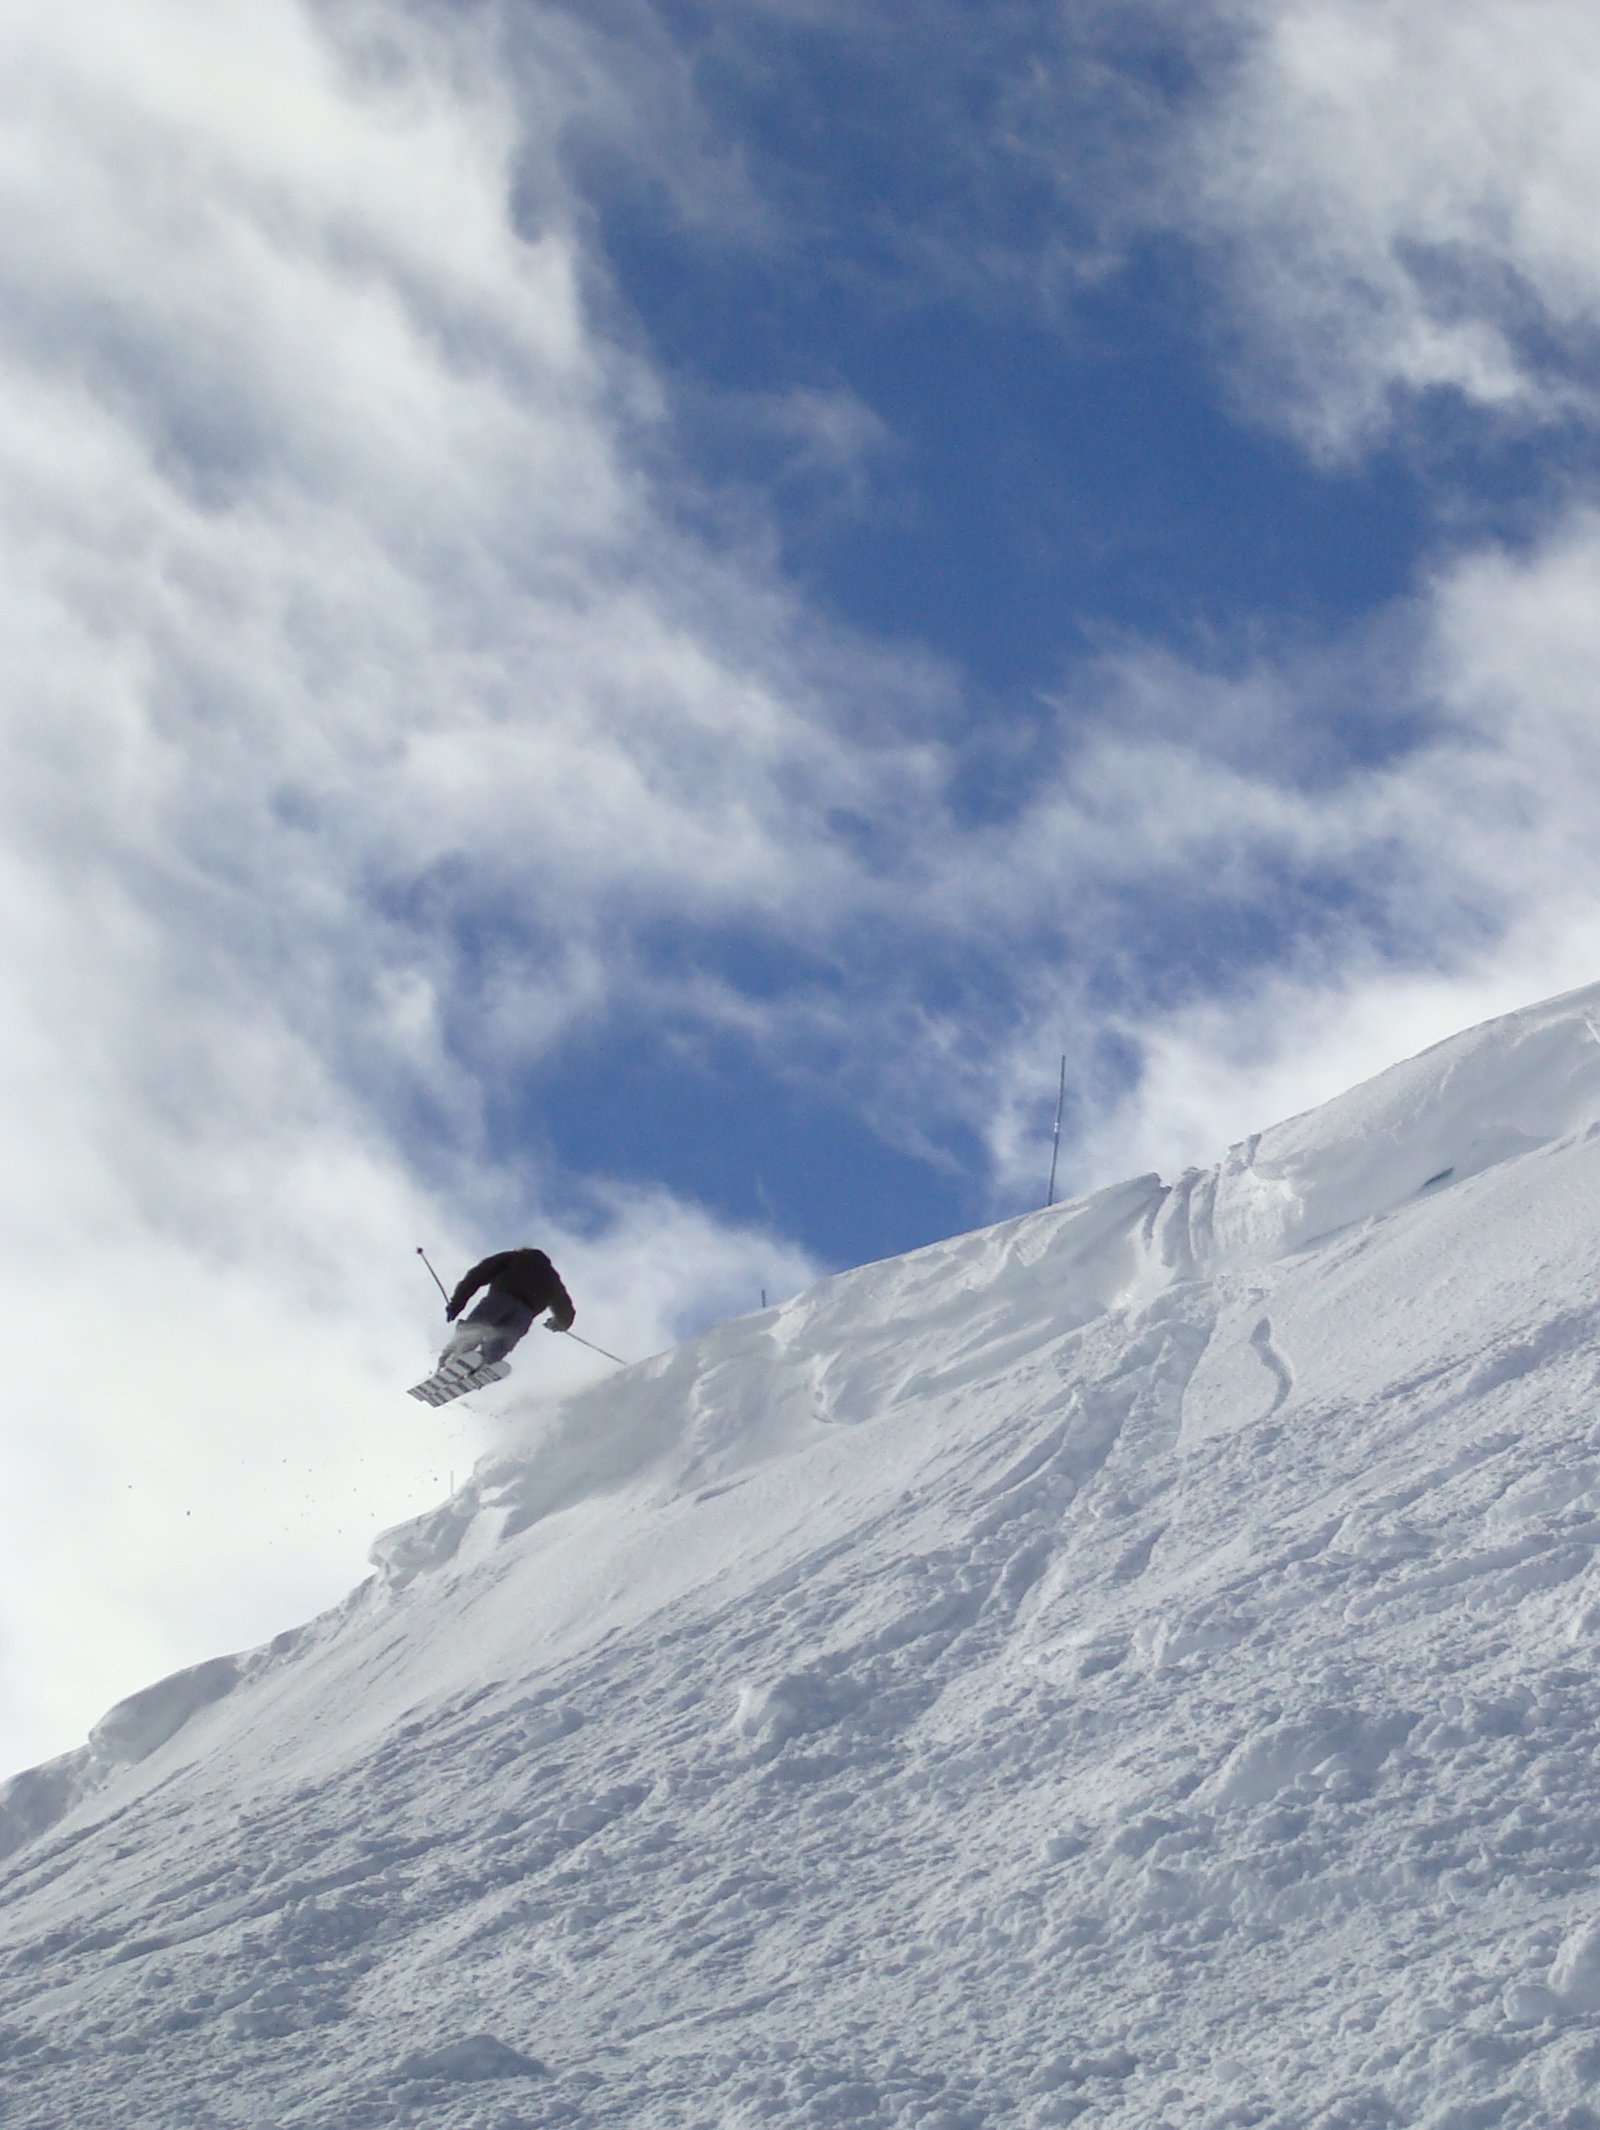 Nose Butter 3 off a Cornice